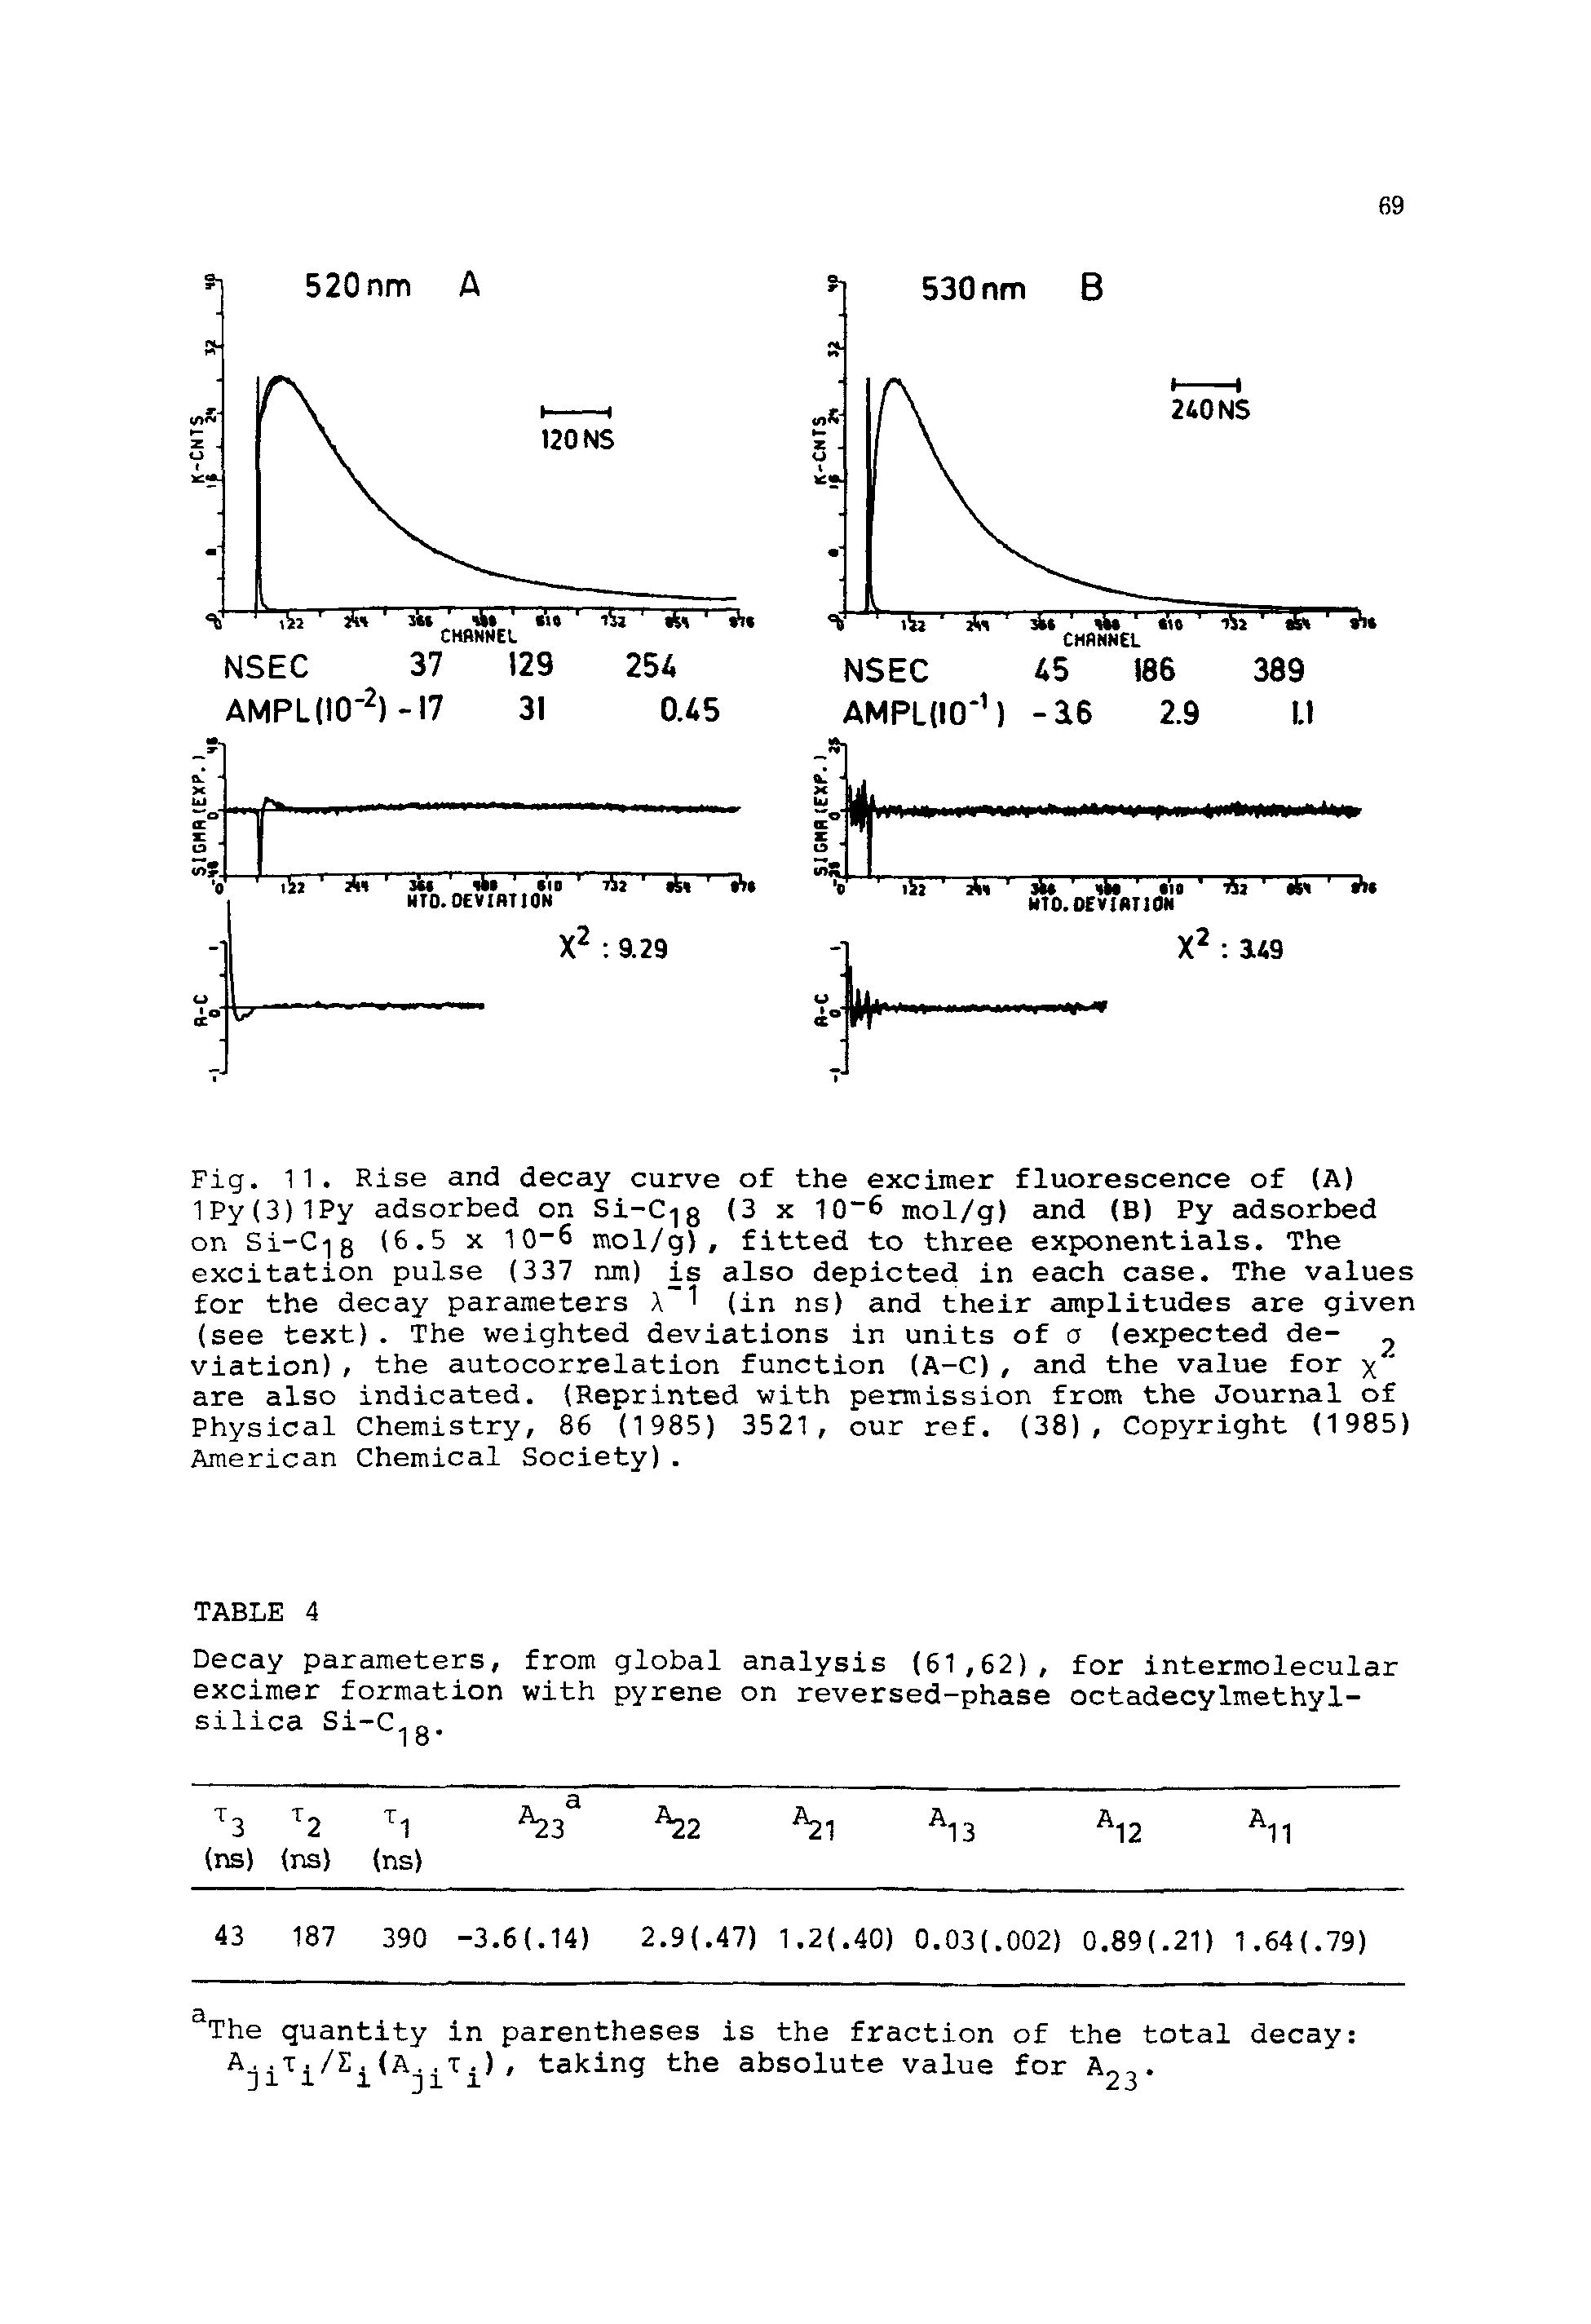 Fig. 11. Rise and decay curve of the excimer fluorescence of (A) 1Py(3)1Py adsorbed on Si-C- 8 (3 x 10 6 mol/g) and (B) Py adsorbed on Si-C- 8 (5-5 10 5 mol/g), fitted to three exponentials. The excitation pulse (337 nm) is also depicted in each case. The values for the decay parameters A 1 (in ns) and their amplitudes are given (see text). The weighted deviations in units of a (expected de- viation), the autocorrelation function (A-C), and the value for x " are also indicated. (Reprinted with permission from the Journal of Physical Chemistry, 86 (1985) 3521, our ref. (38), Copyright (1985) American Chemical Society).